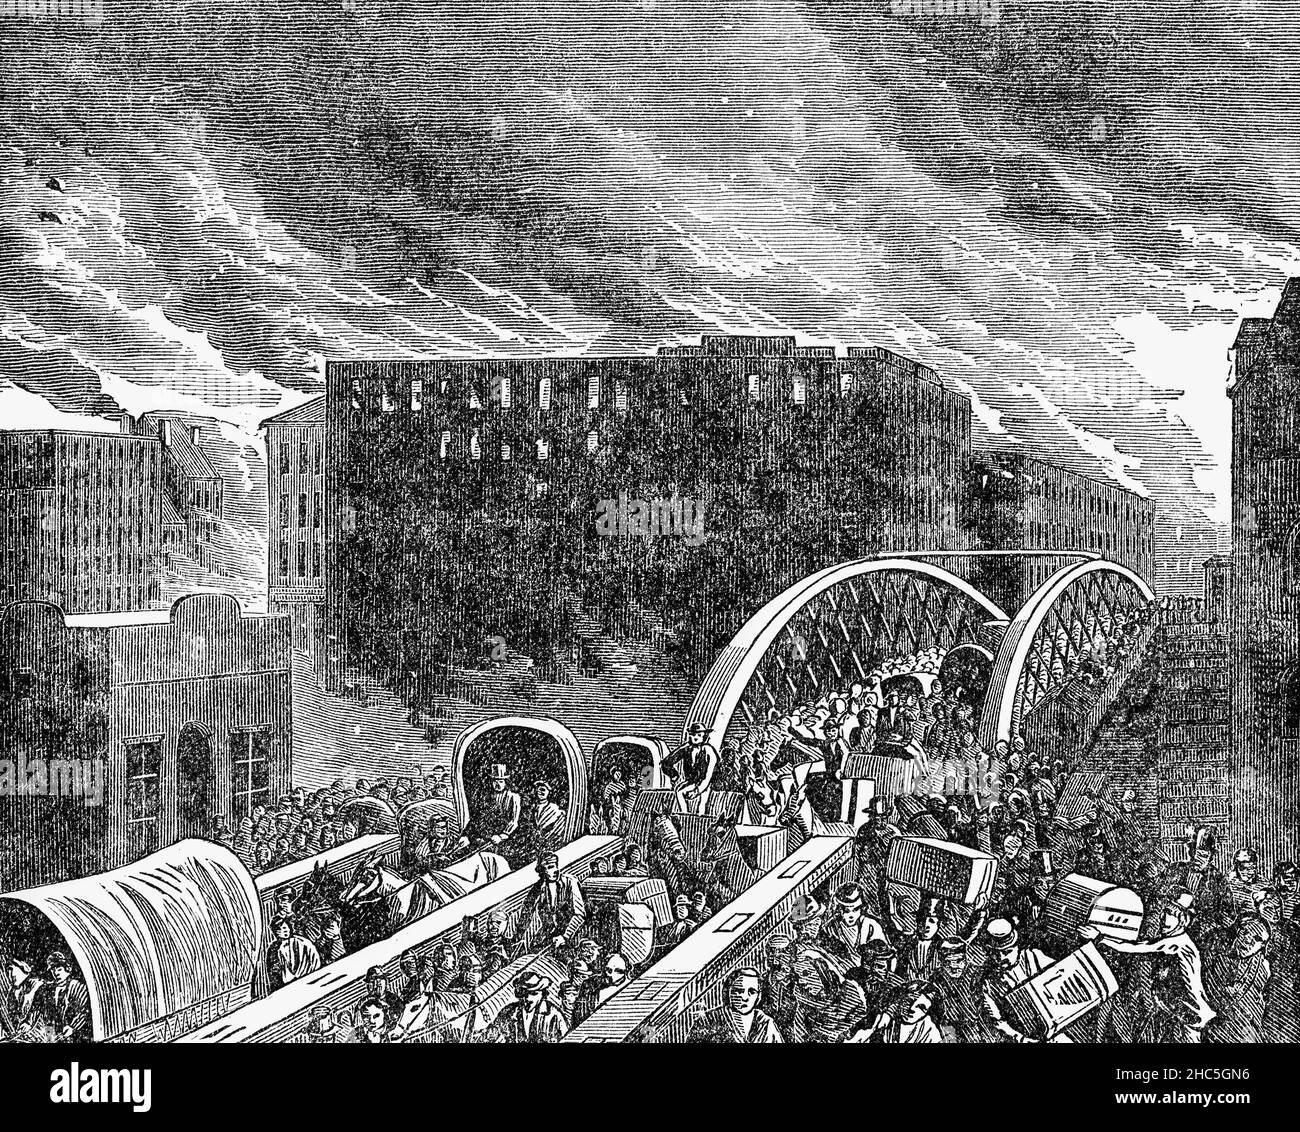 A late 19th Century illustration of the Great Chicago Fire, a conflagration that burned in the American city of Chicago during October 8–10, 1871. The fire killed approximately 300 people, destroyed roughly 3.3 square miles of the city including over 17,000 structures, and left more than 100,000 residents homeless. The fire began in a neighbourhood southwest of the city center after a long period of hot dry windy conditions and the wooden construction prevalent in the city, led to the conflagration. Stock Photo